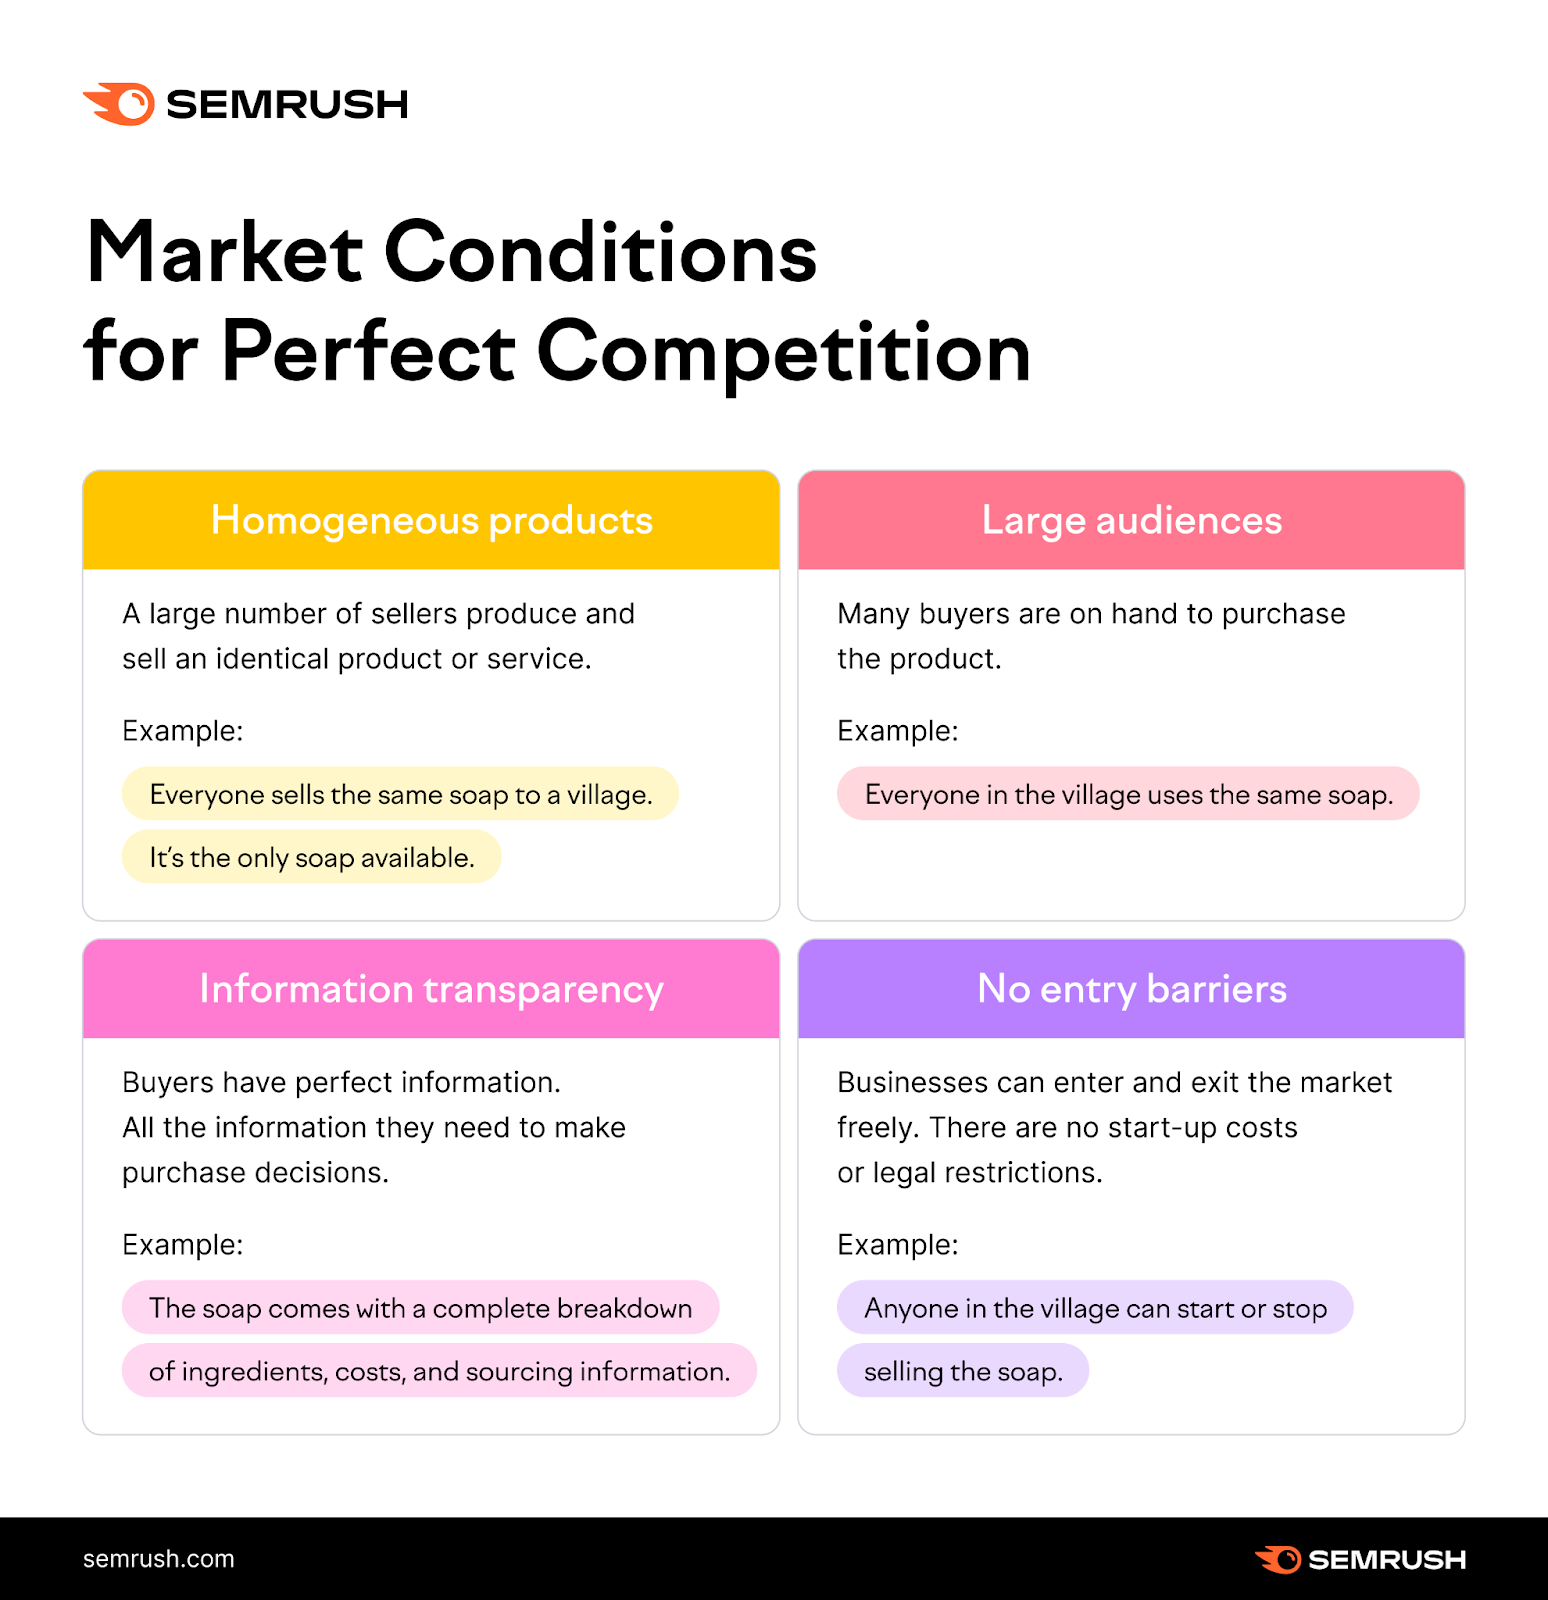 What Is a Perfectly Competitive Market?